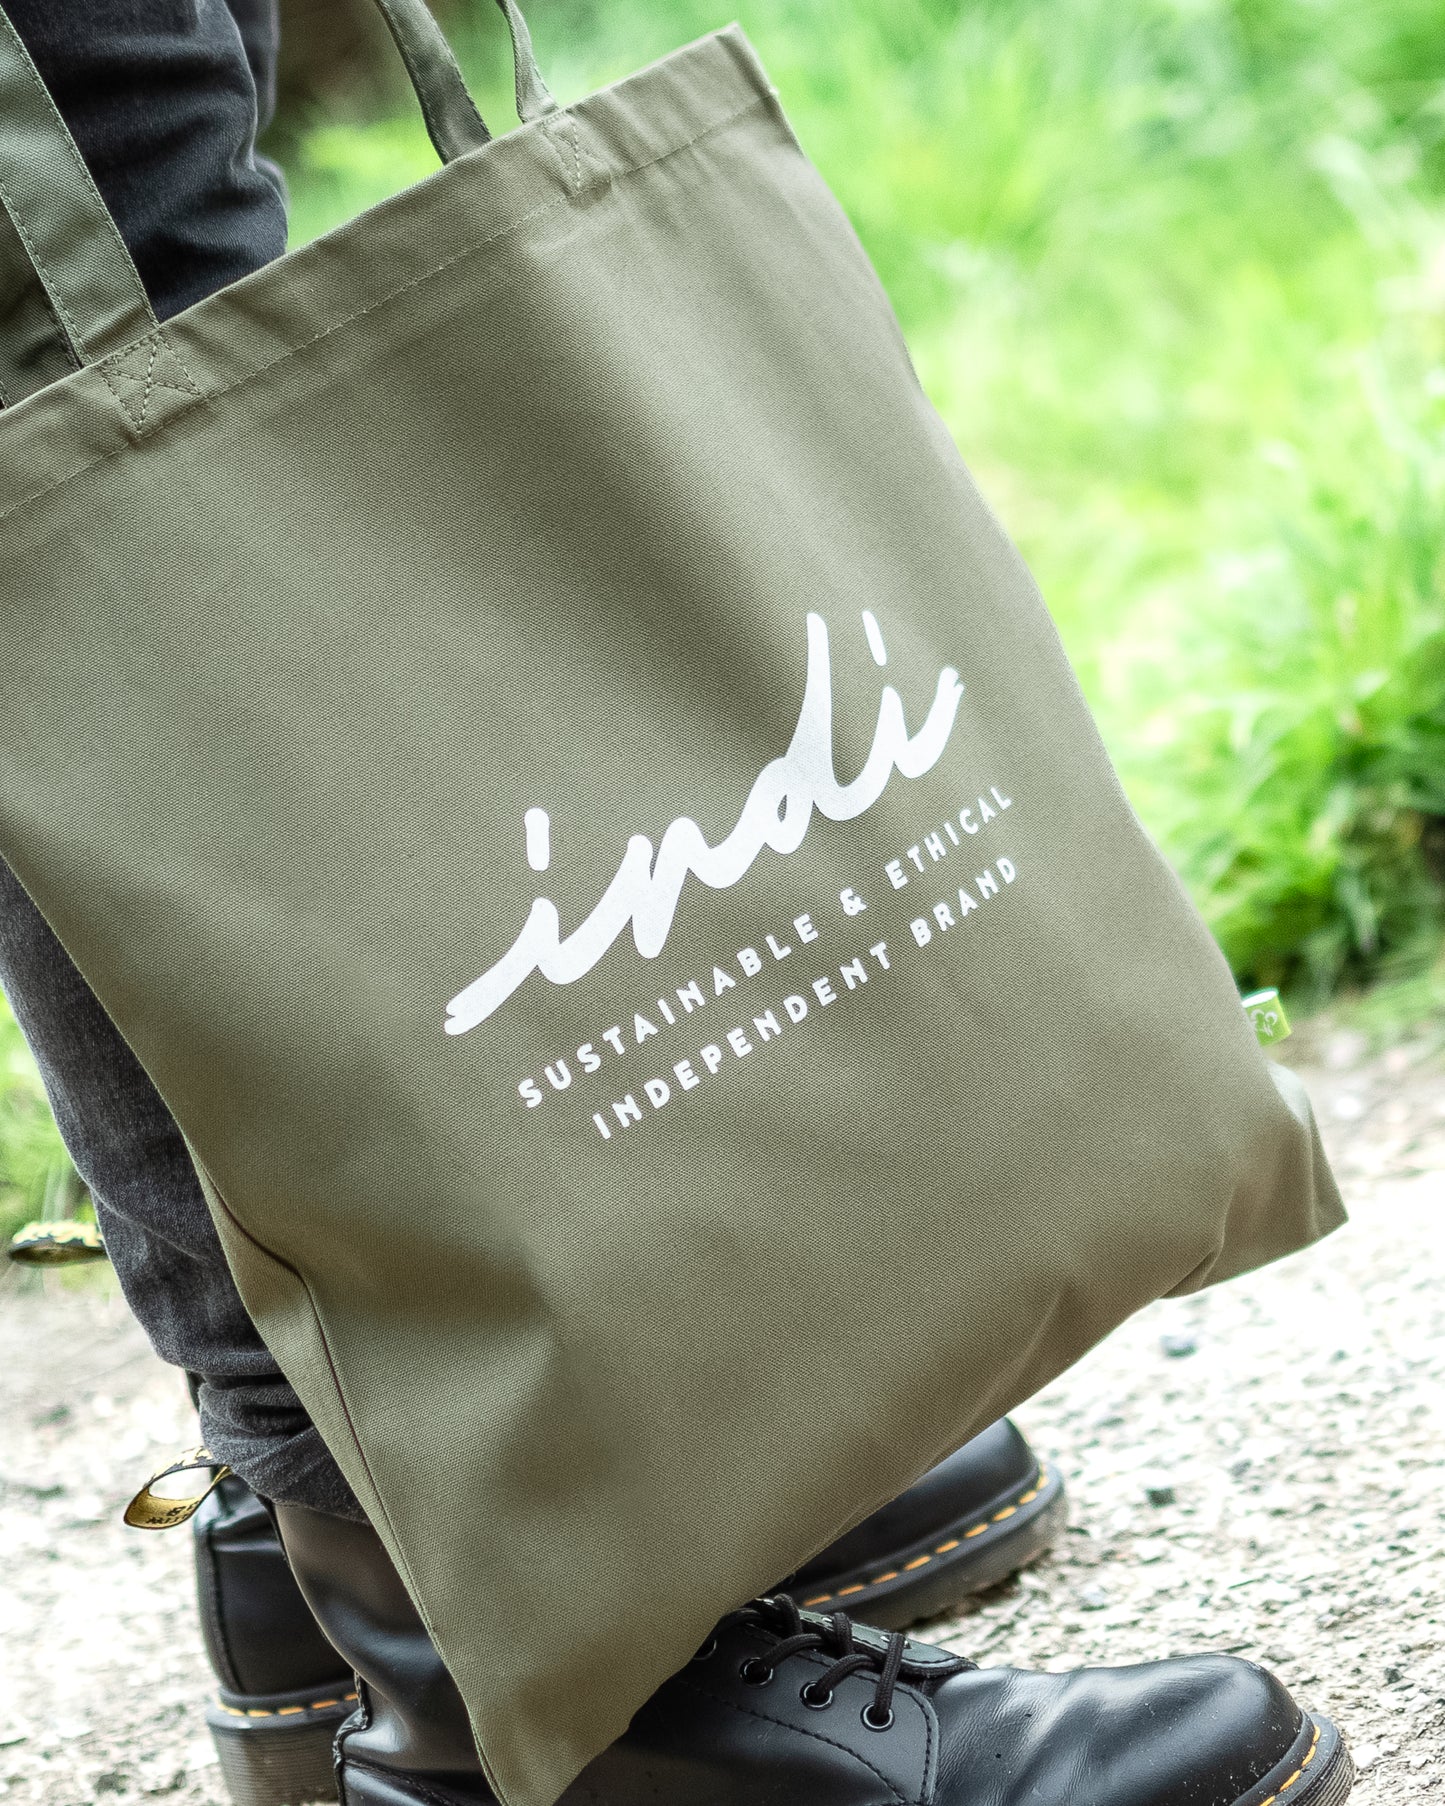 Strong Canvas Tote Bag in Khaki